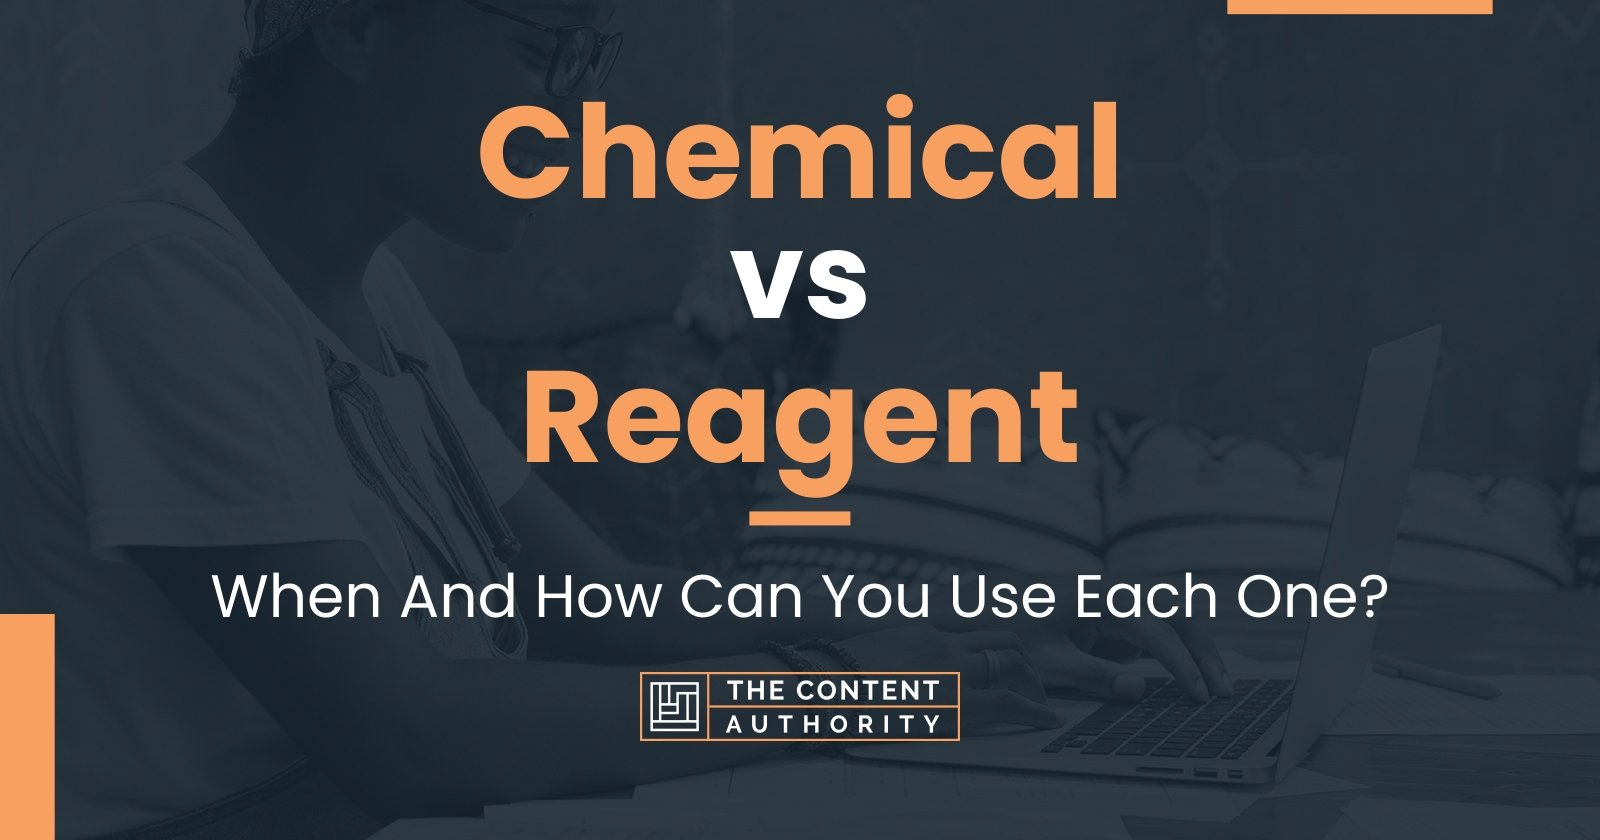 Chemical vs Reagent: When And How Can You Use Each One?